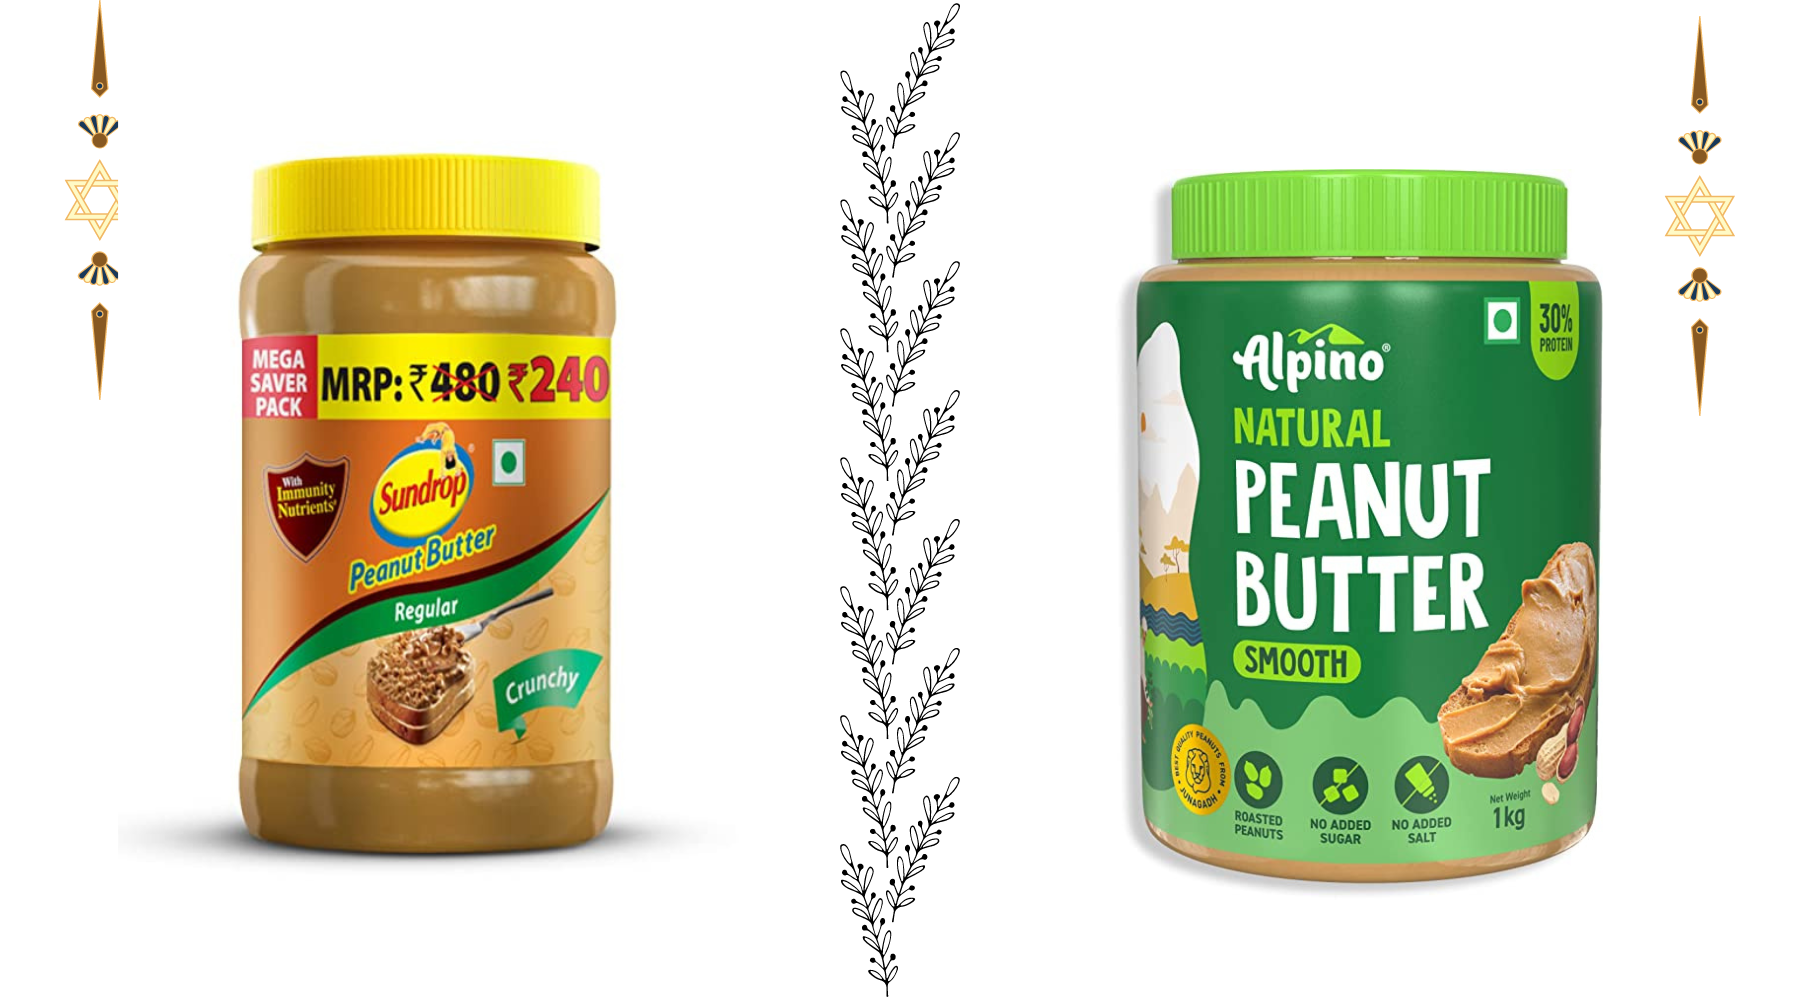 Sundrop or Alpino: Which Peanut Butter is More Sustainable?